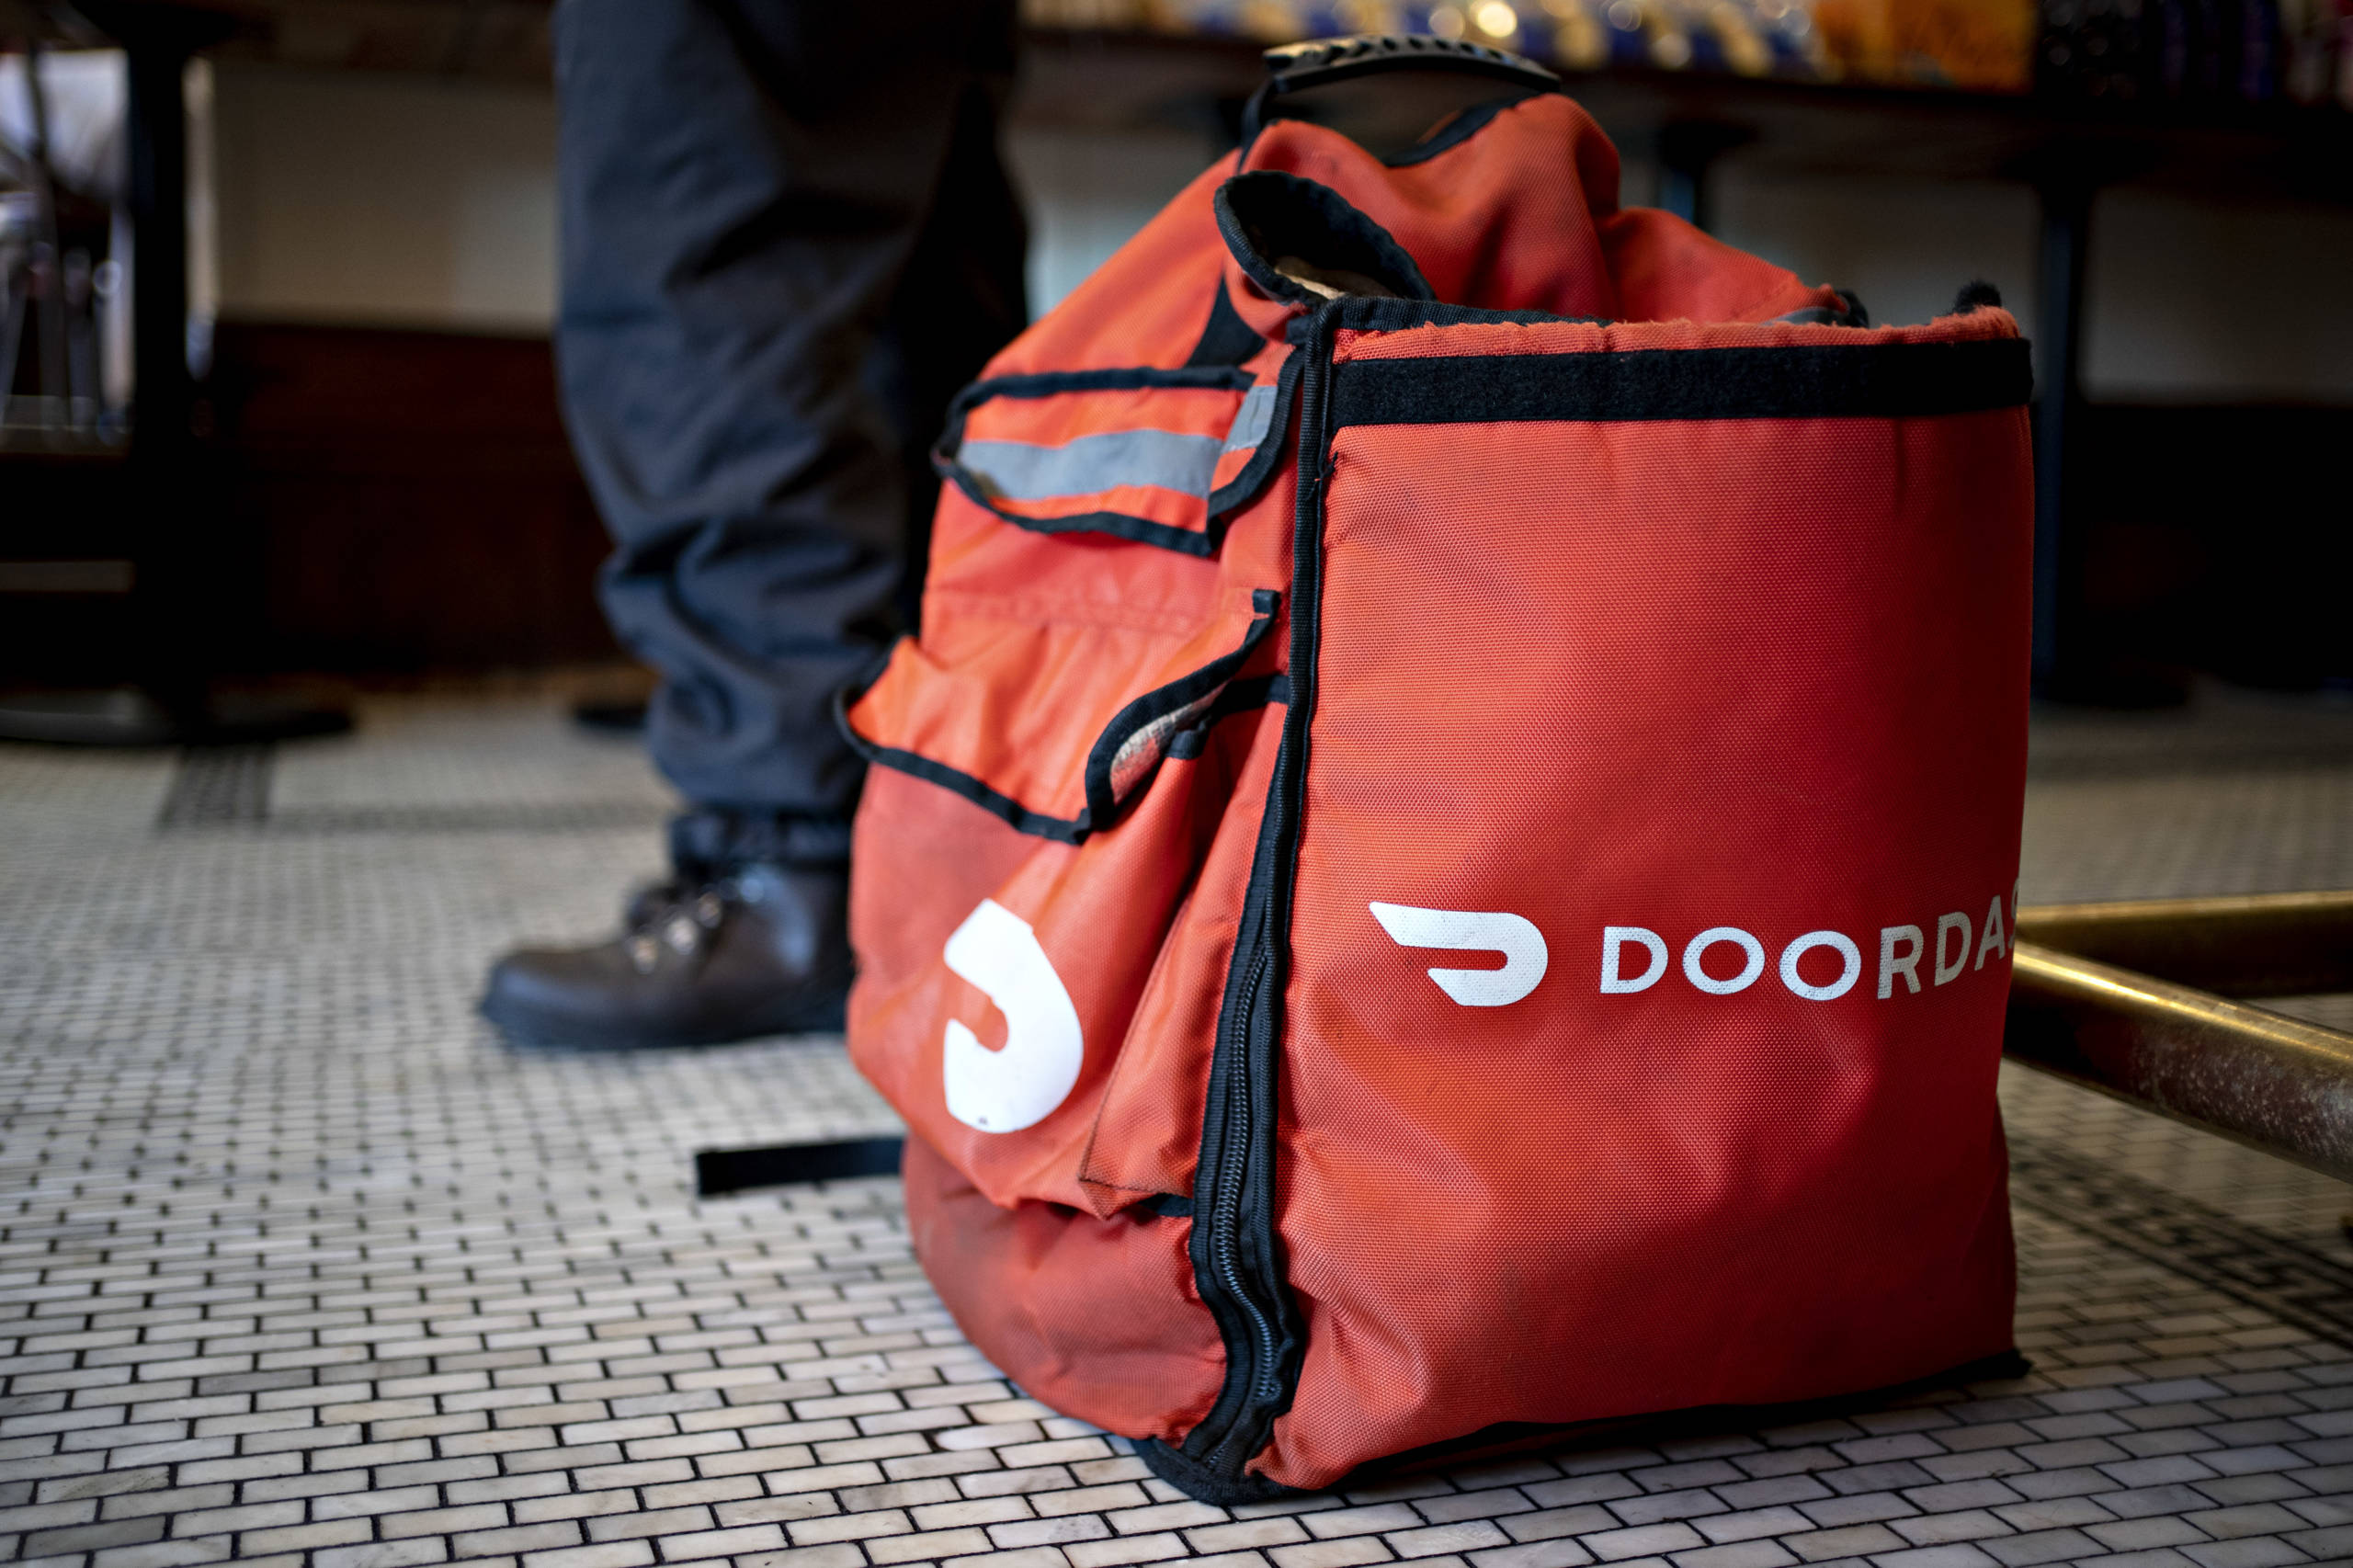 A DoorDash Inc. delivery bag sits on the floor at Chef Geoff's restaurant in Washington, D.C., U.S., on Thursday, March 26, 2020. As the wheels of government turn too slowly for small businesses desperate for a piece of the $2 trillion U.S. relief package due to the coronavirus pandemic, restaurateur Geoff Tracy is using GoFundMe to raise money for 150 hourly workers at his American comfort food standby Chef Geoff's and other restaurants. Photographer: Andrew Harrer/Bloomberg via Getty Images